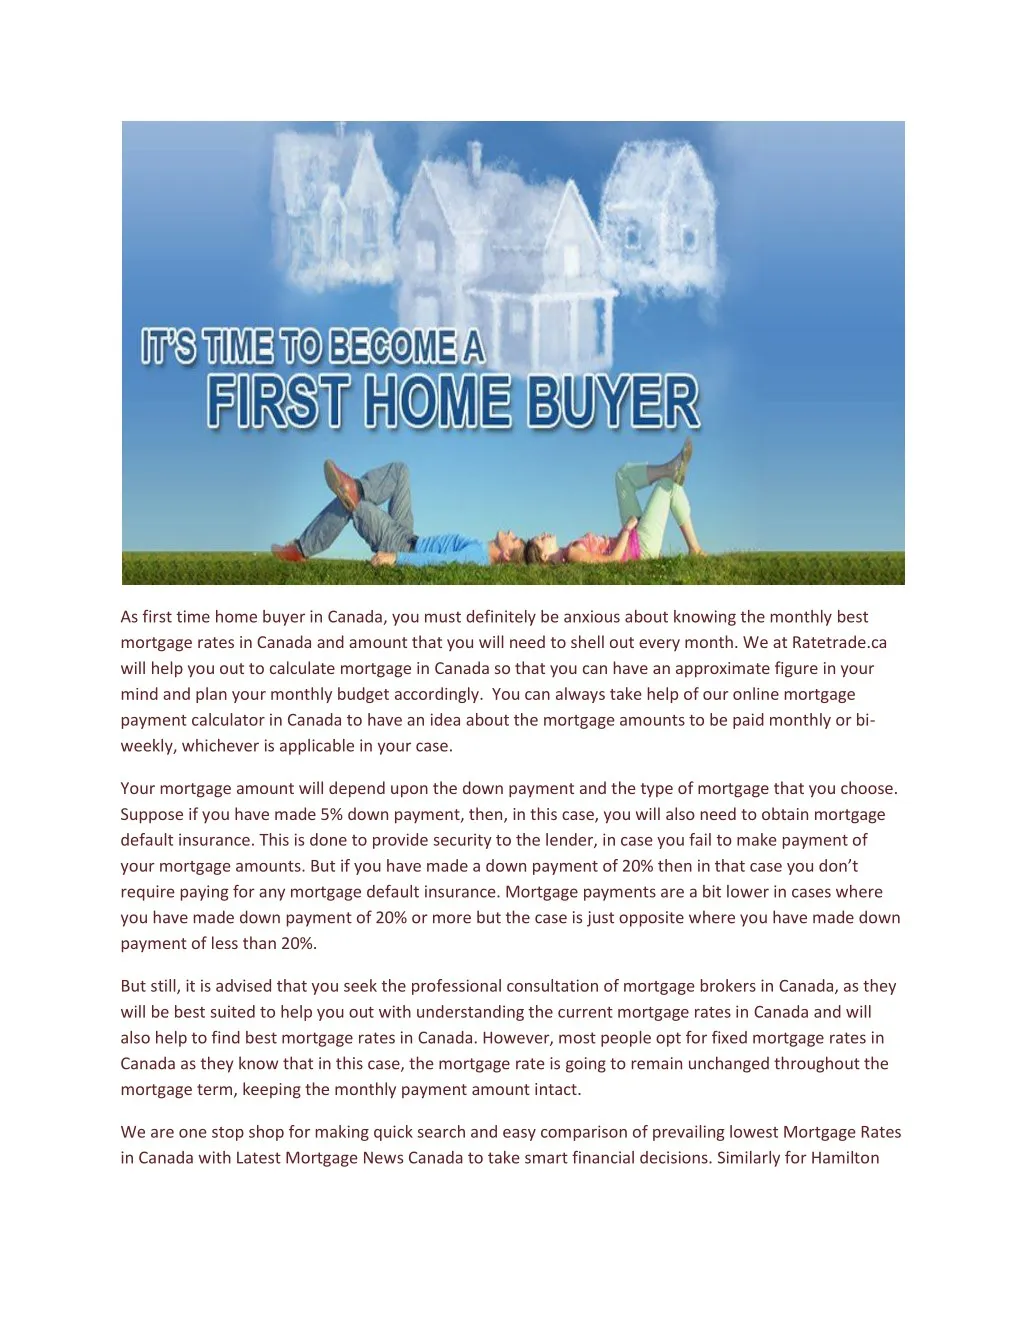 as first time home buyer in canada you must